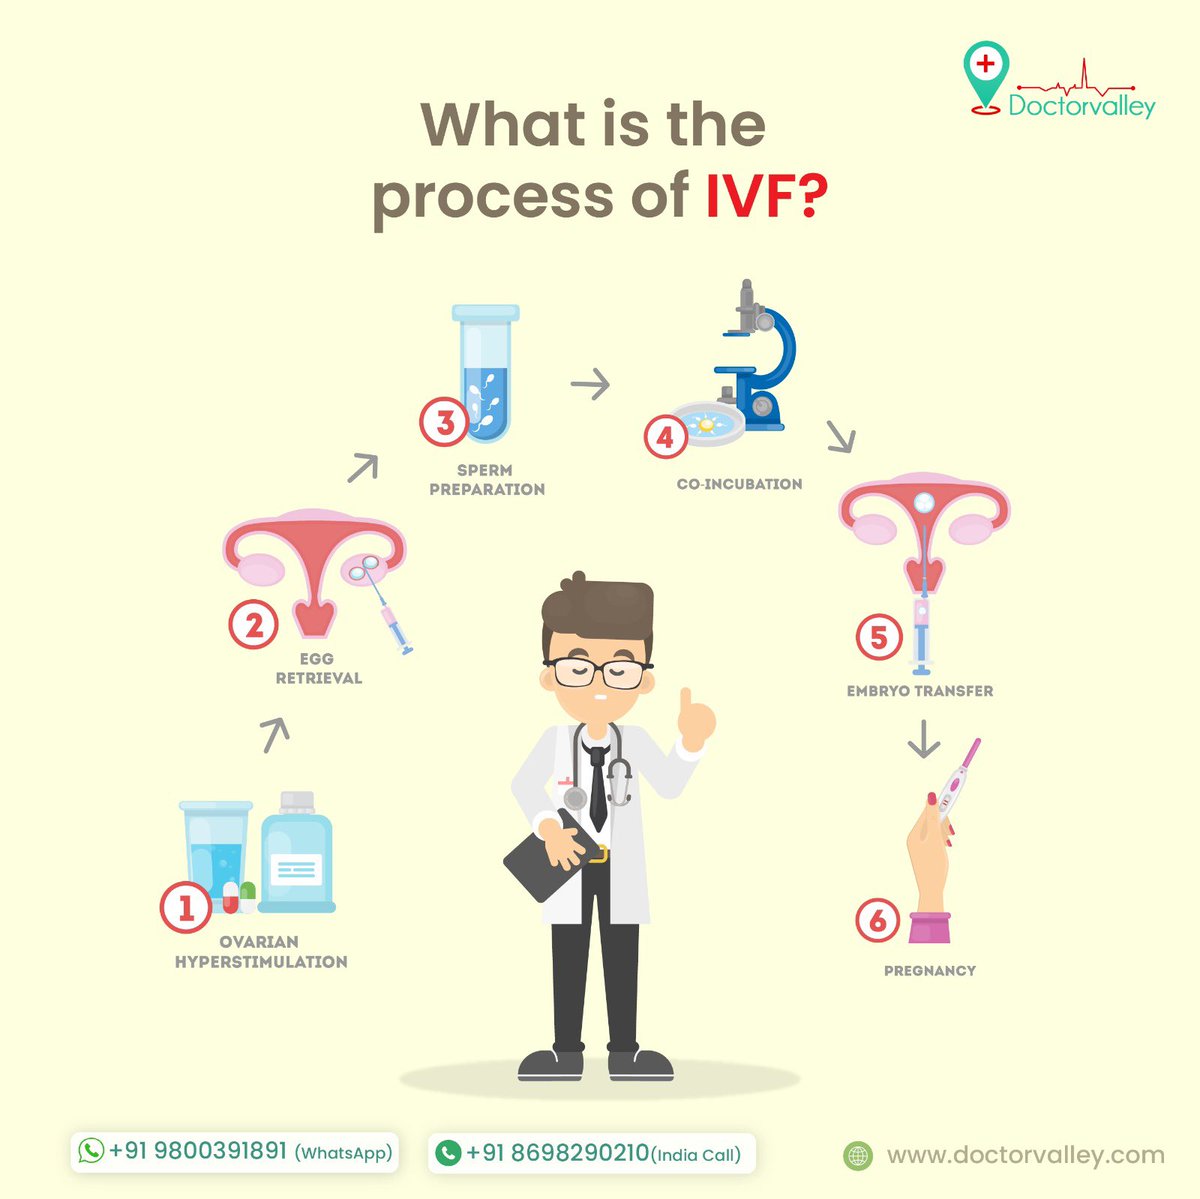 Ready to start your IVF journey? 

Let us guide you every step of the way. Contact us today to learn more about our personalized IVF treatment options. 🌟 

#IVFjourney #FertilityTreatment #ContactUs #DoctorValley